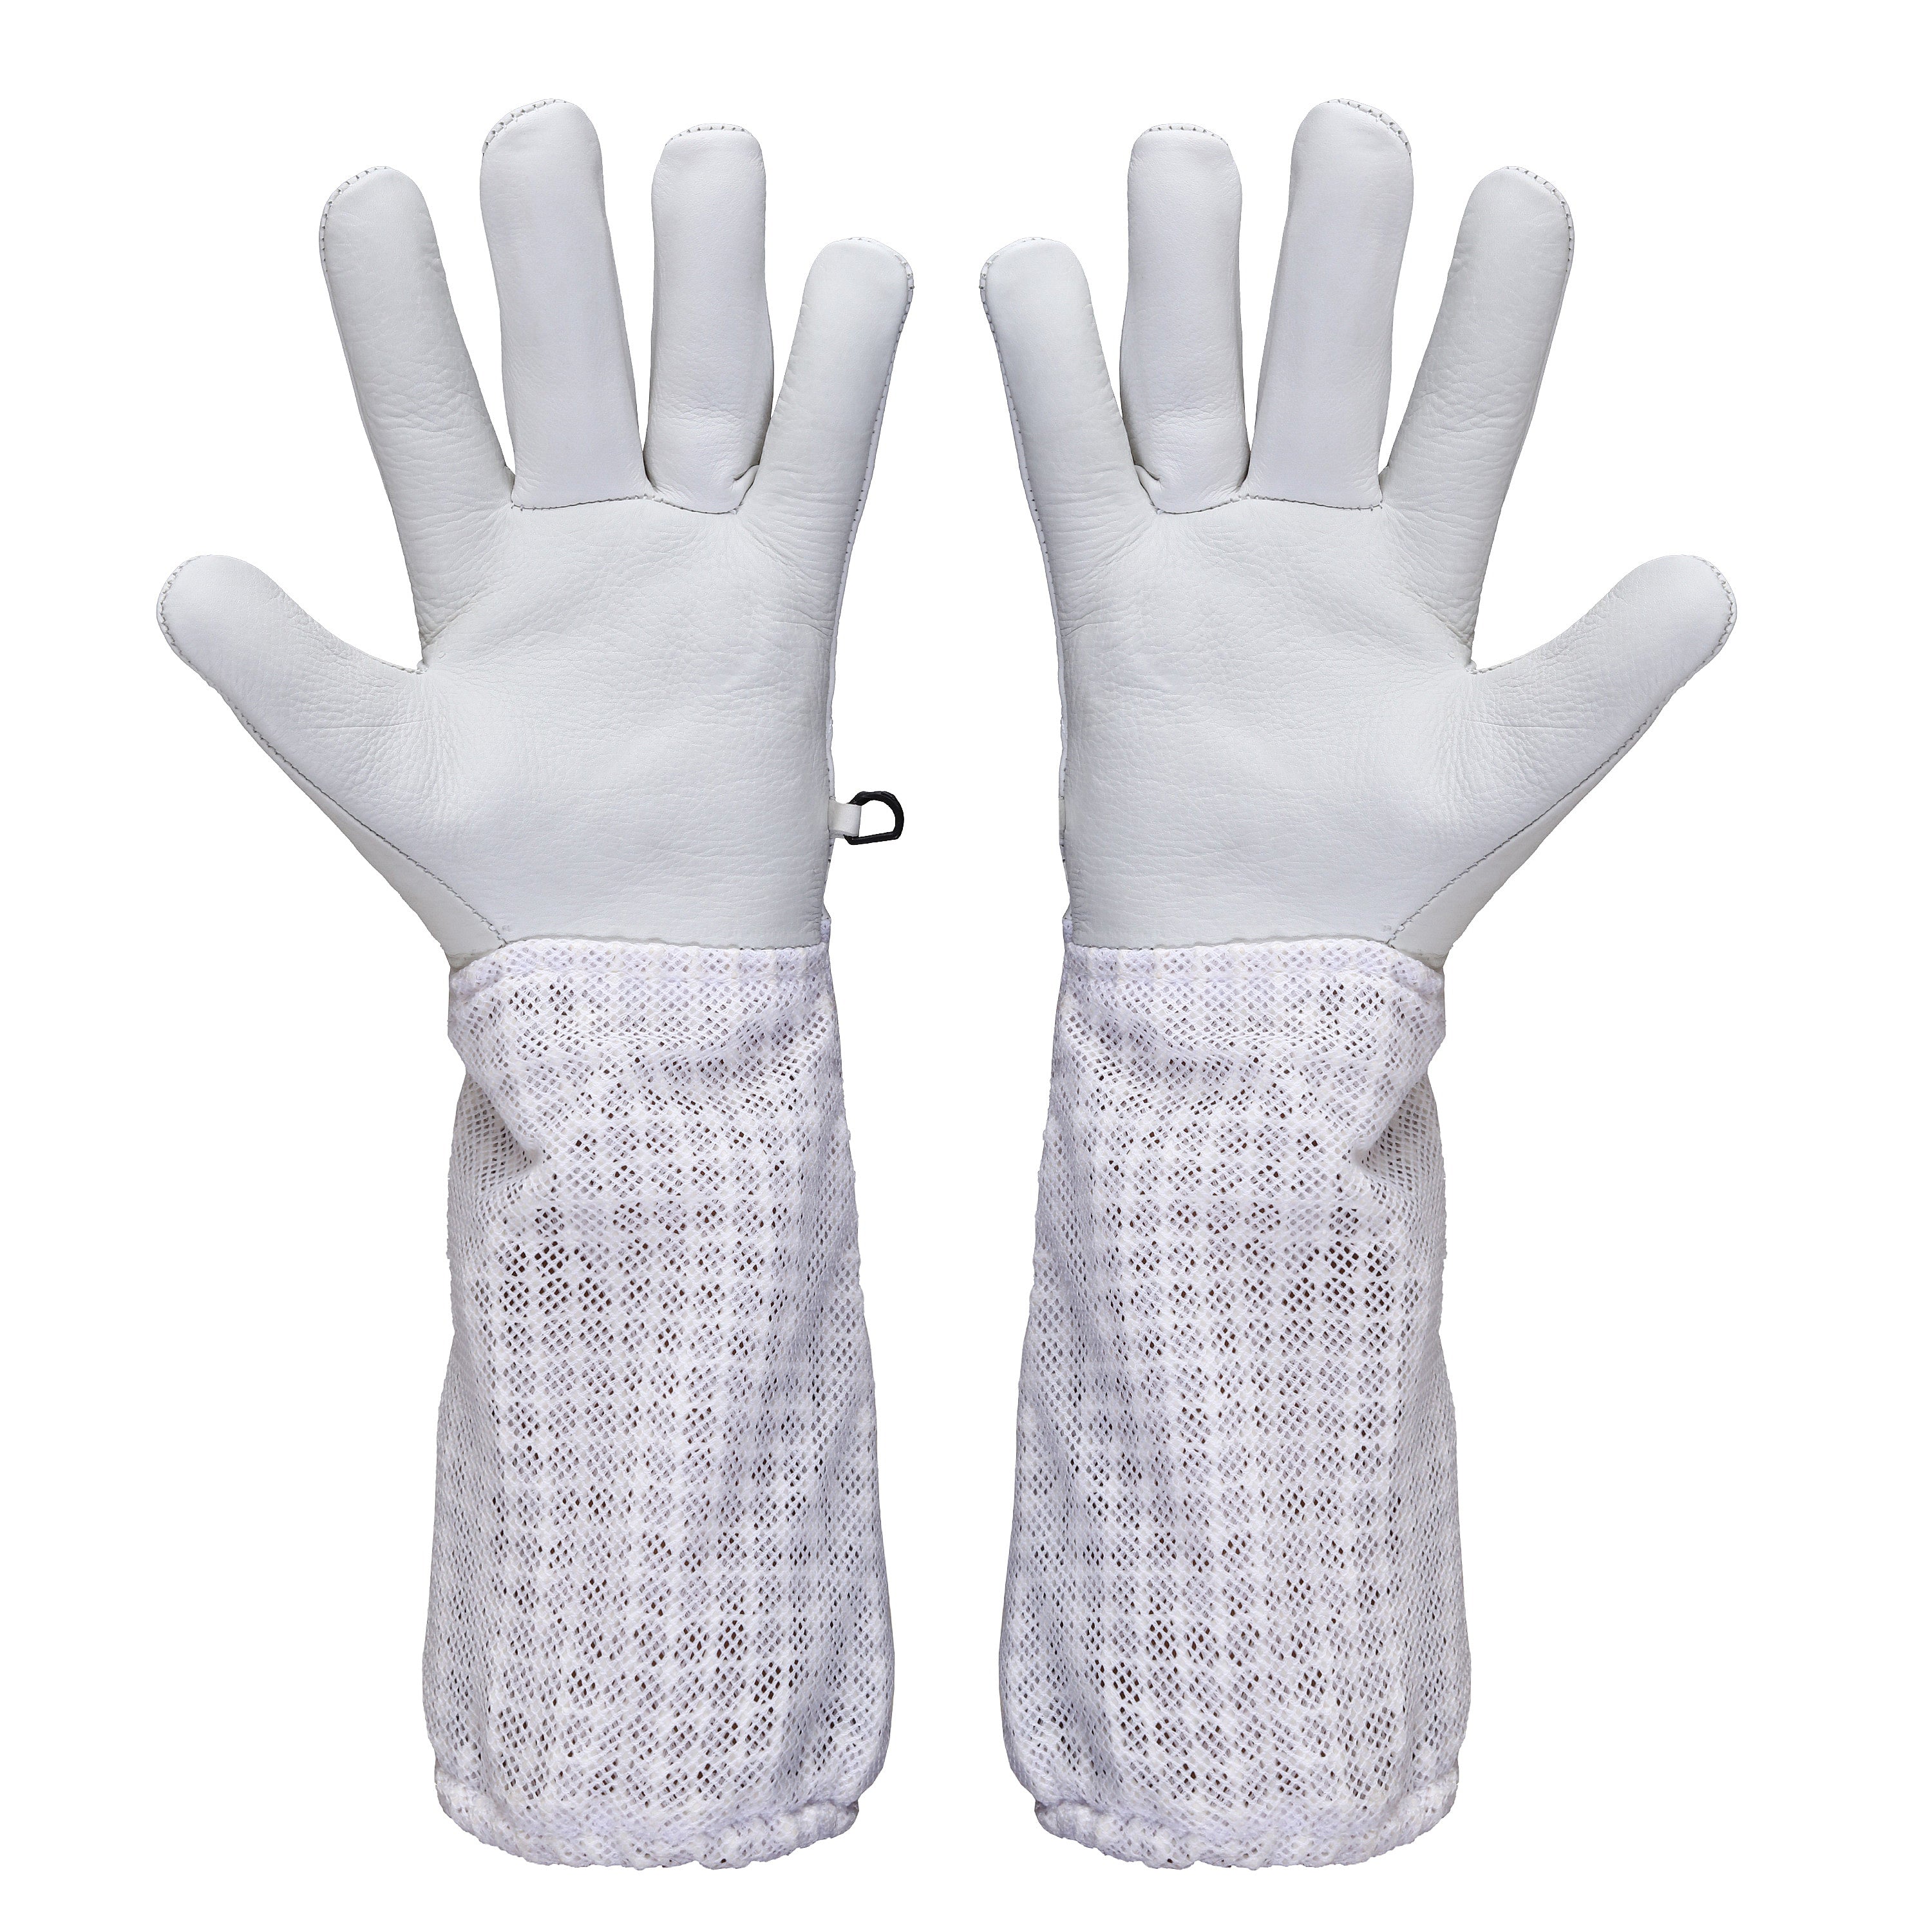 Goatskin Beekeeping Gloves with 3 Layers Ventilation Cuff 